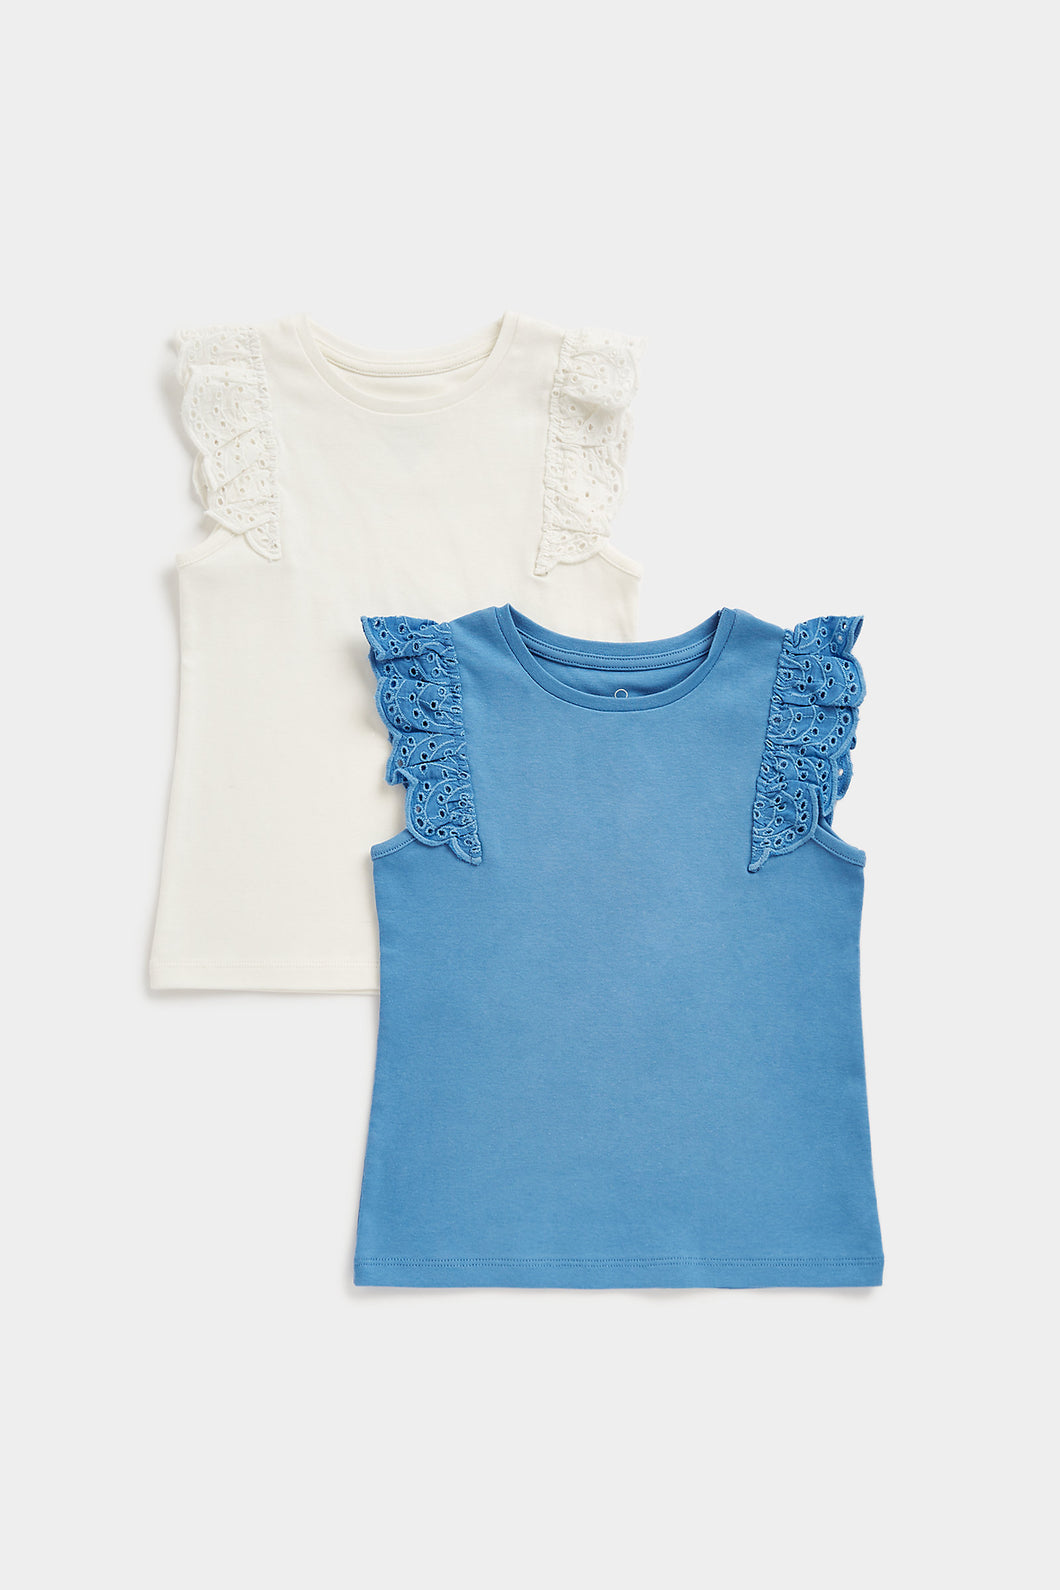 Mothercare Sleeveless T-Shirts - 2 pack